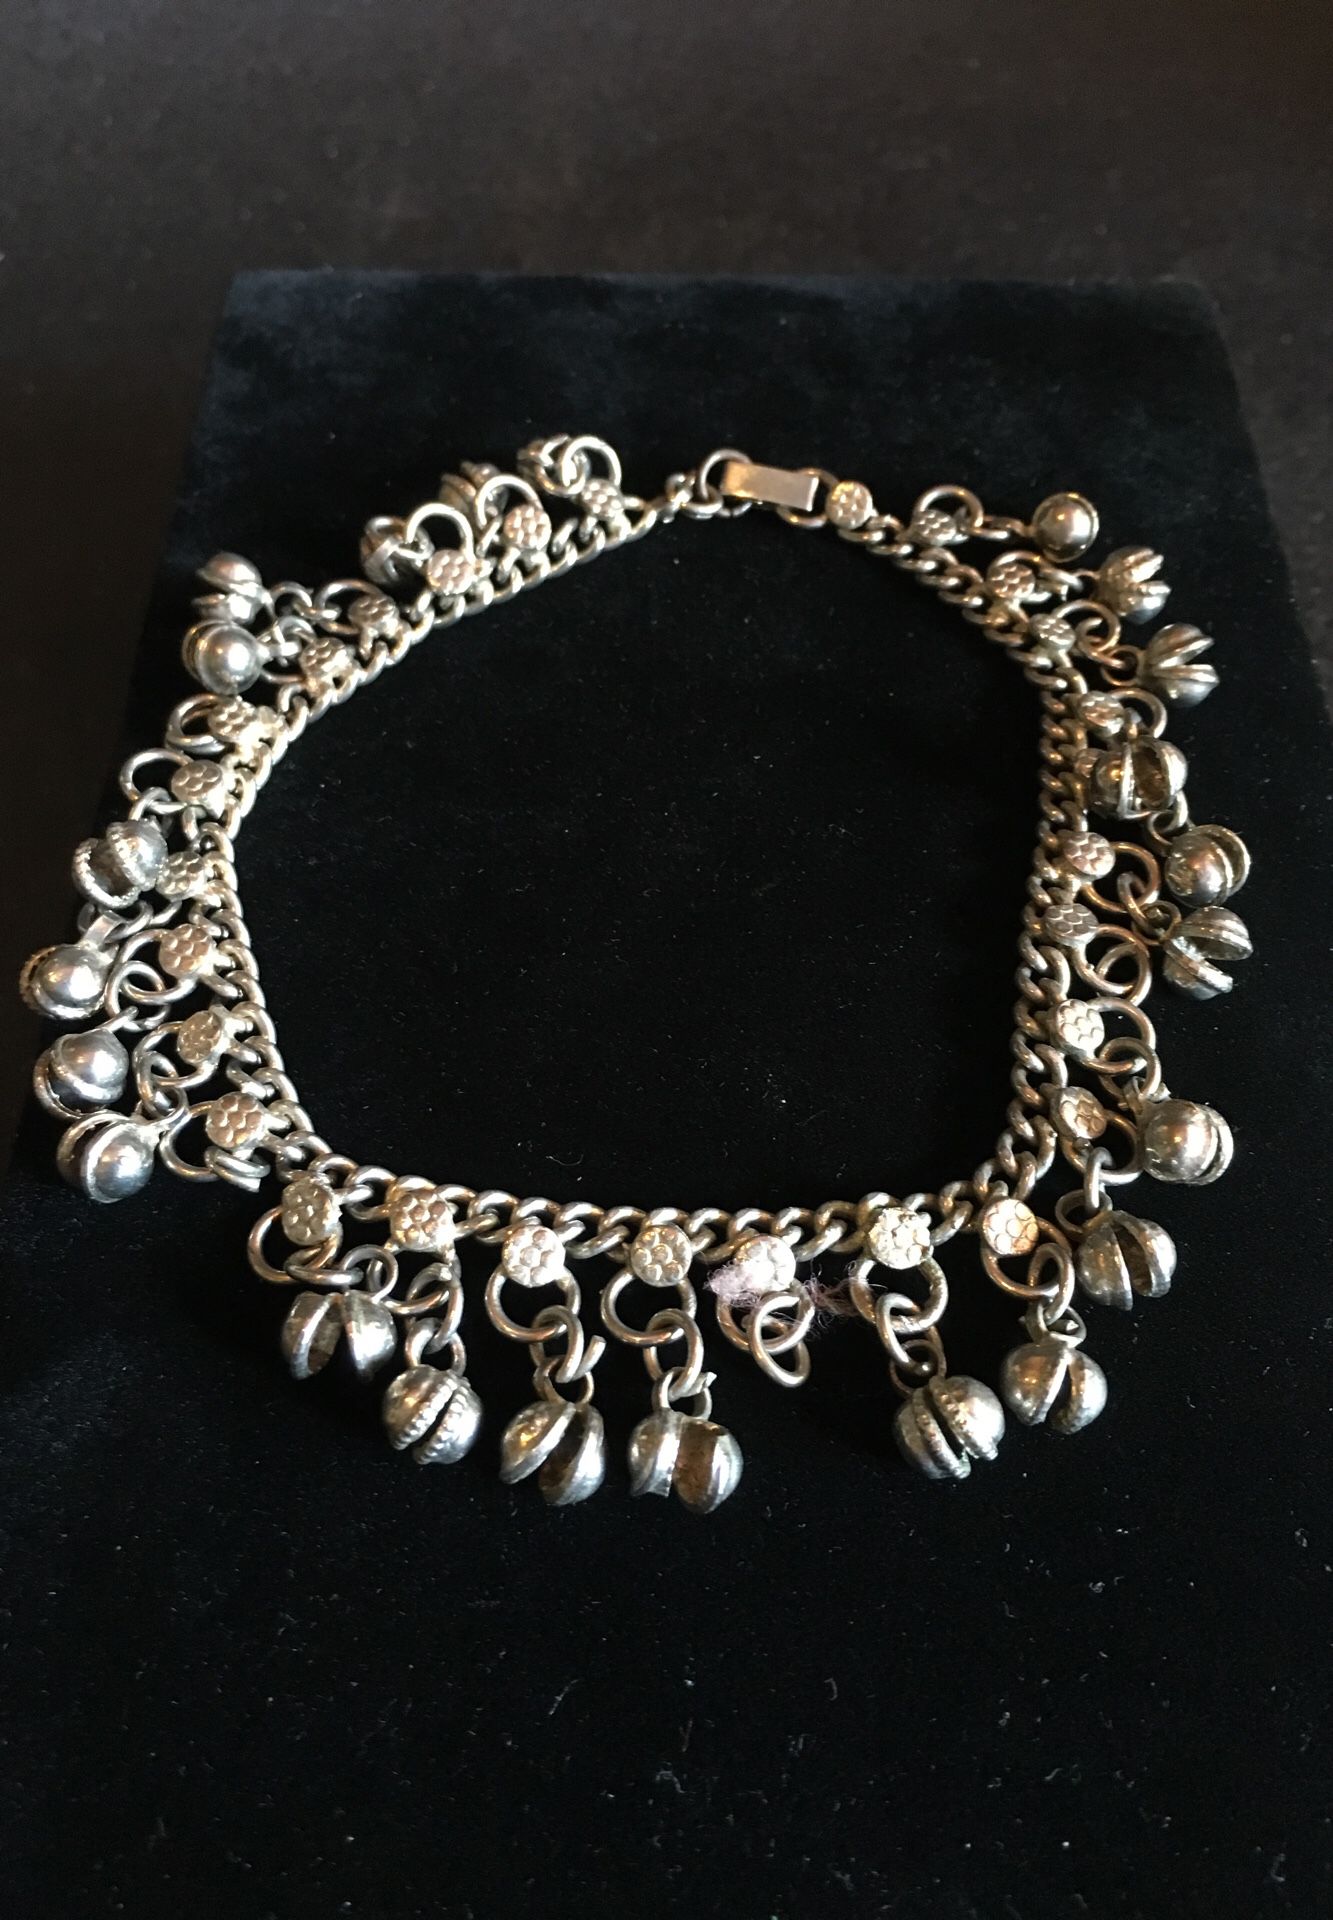 Anklet with Bells, Indian- Like New Condition, Belly Dancers Gear, 10”- Silver Tone- Listing Hundreds Of Items